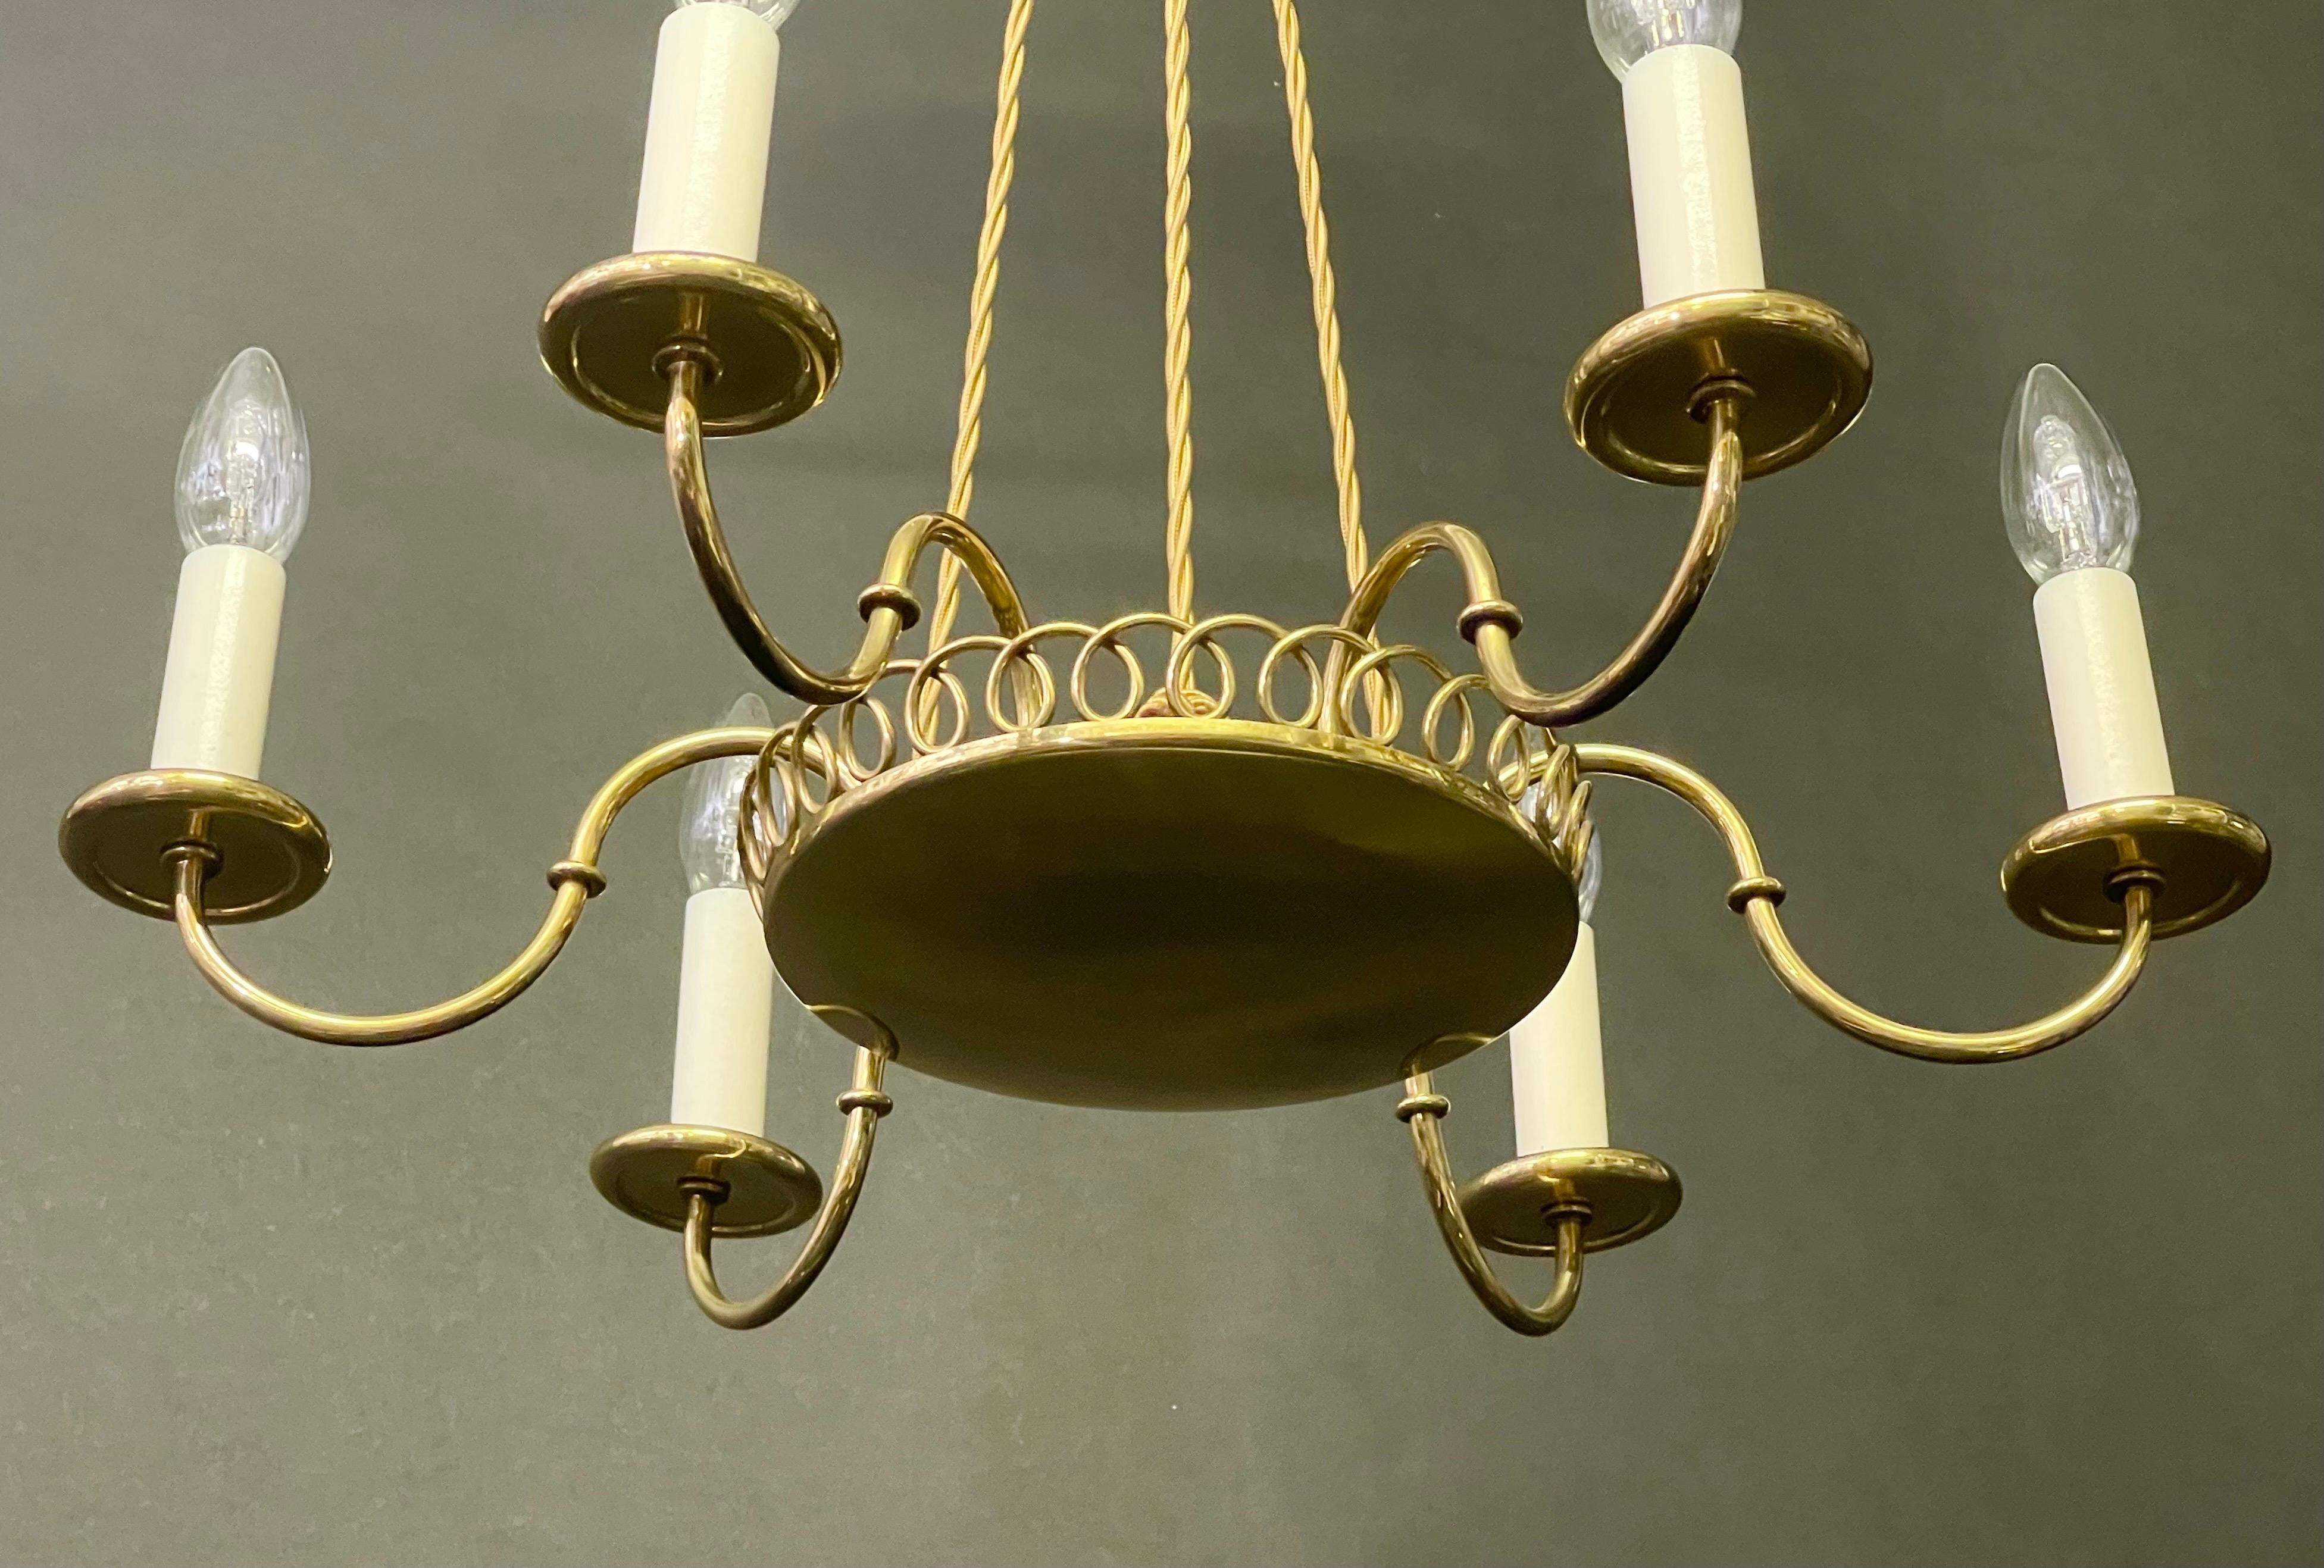  Delicate Polished Brass Chandelier by Josef Frank, 1950s (restored) In Excellent Condition For Sale In Wiesbaden, Hessen